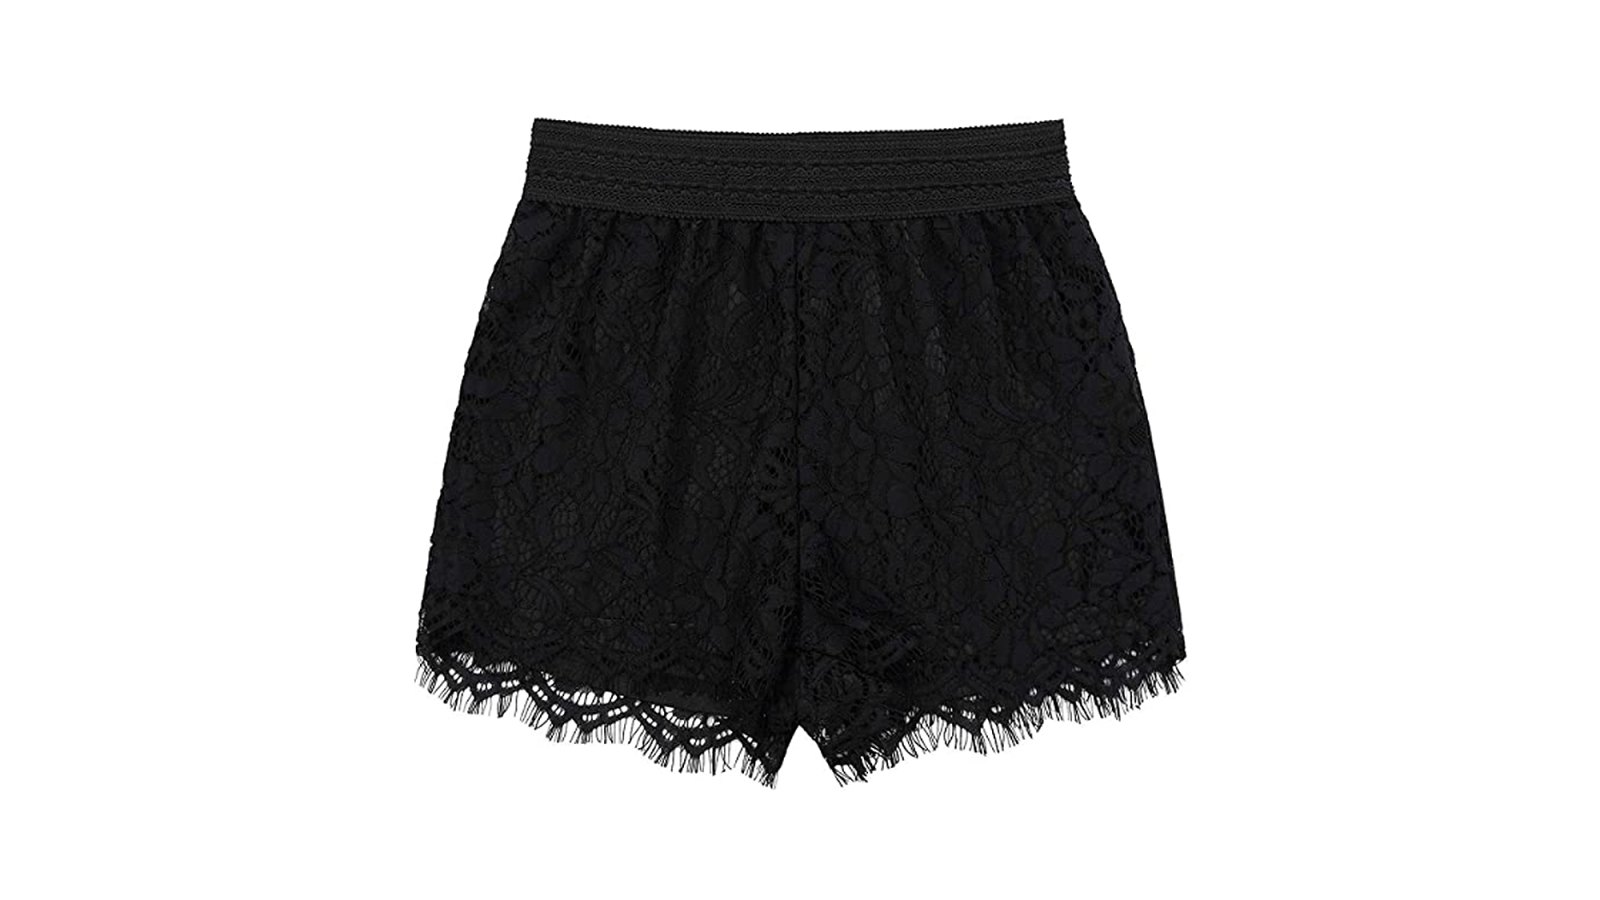 KGYA Flouncy Lace Shorts Will Keep the Compliments Rolling In